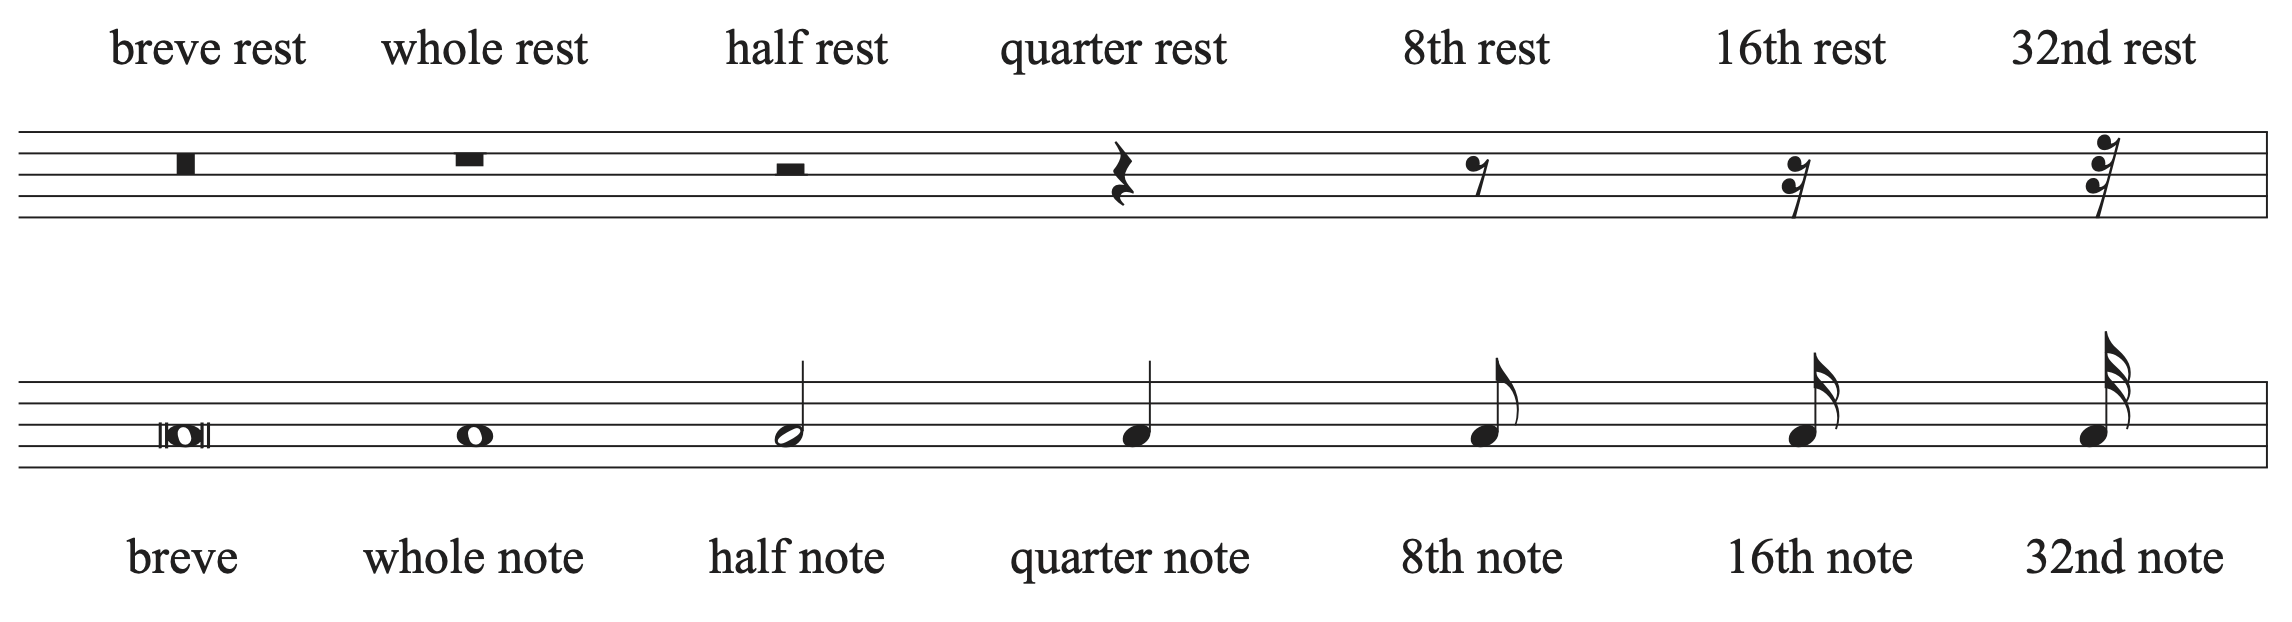 Chart showing note and rest notation for breves, whole notes, half notes, quarter notes, eighth notes, sixteenth notes, and thirty-second notes.